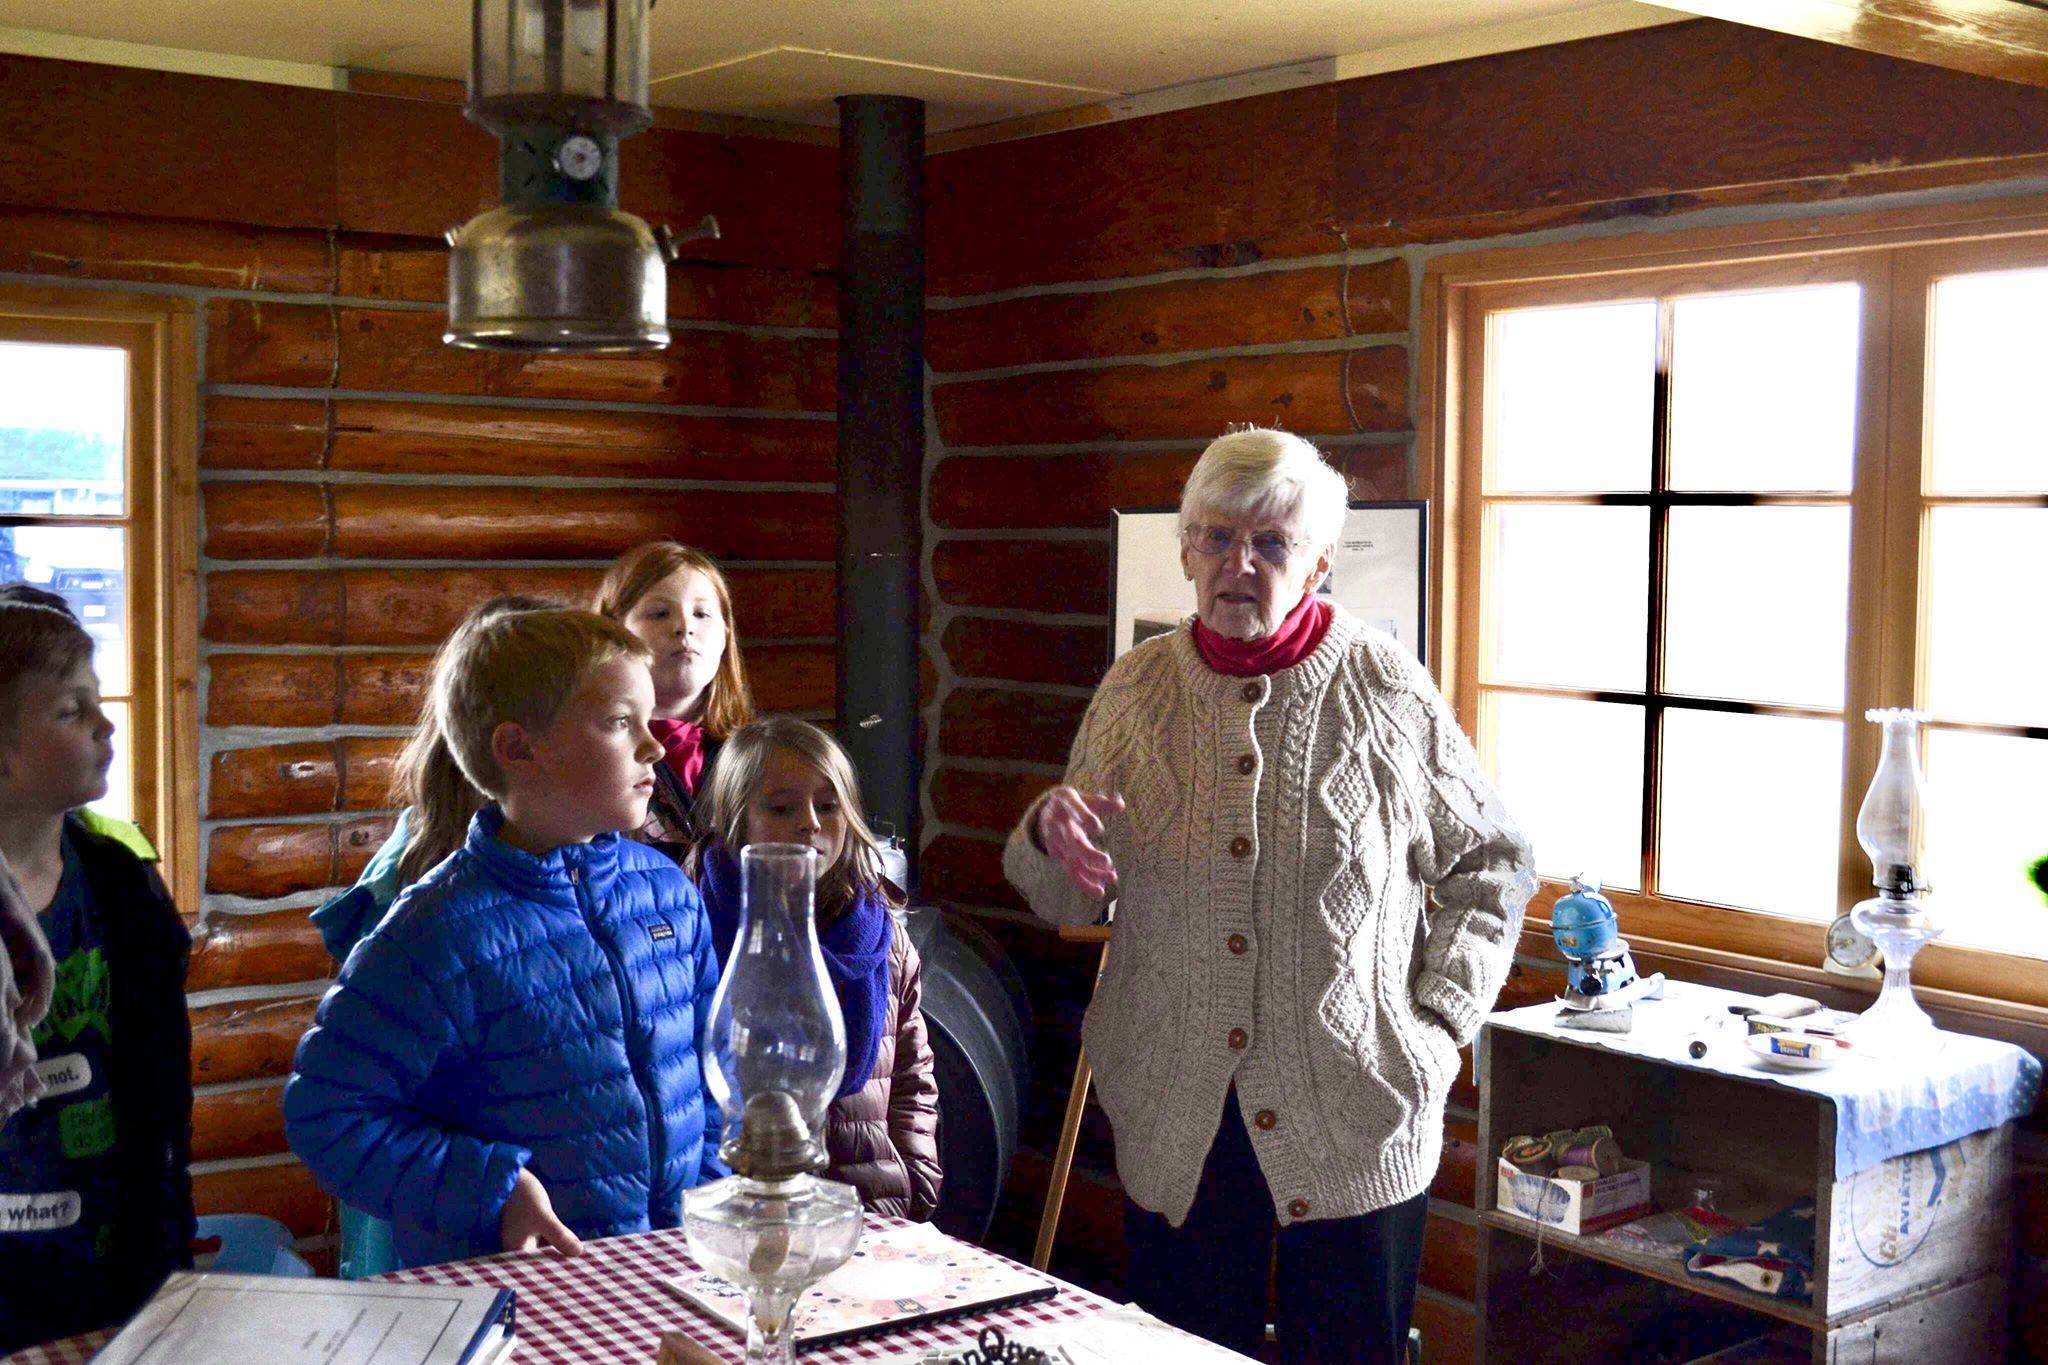 Marge Mullen shows a group of third graders around the Howard Lee Homestead, which was used as the city’s first post office when she first homesteaded in Soldotna, on Wednesday, oct. 17, 2018, in Soldotna, AK. (Photo by Victoria Petersen/Peninsula Clarion)